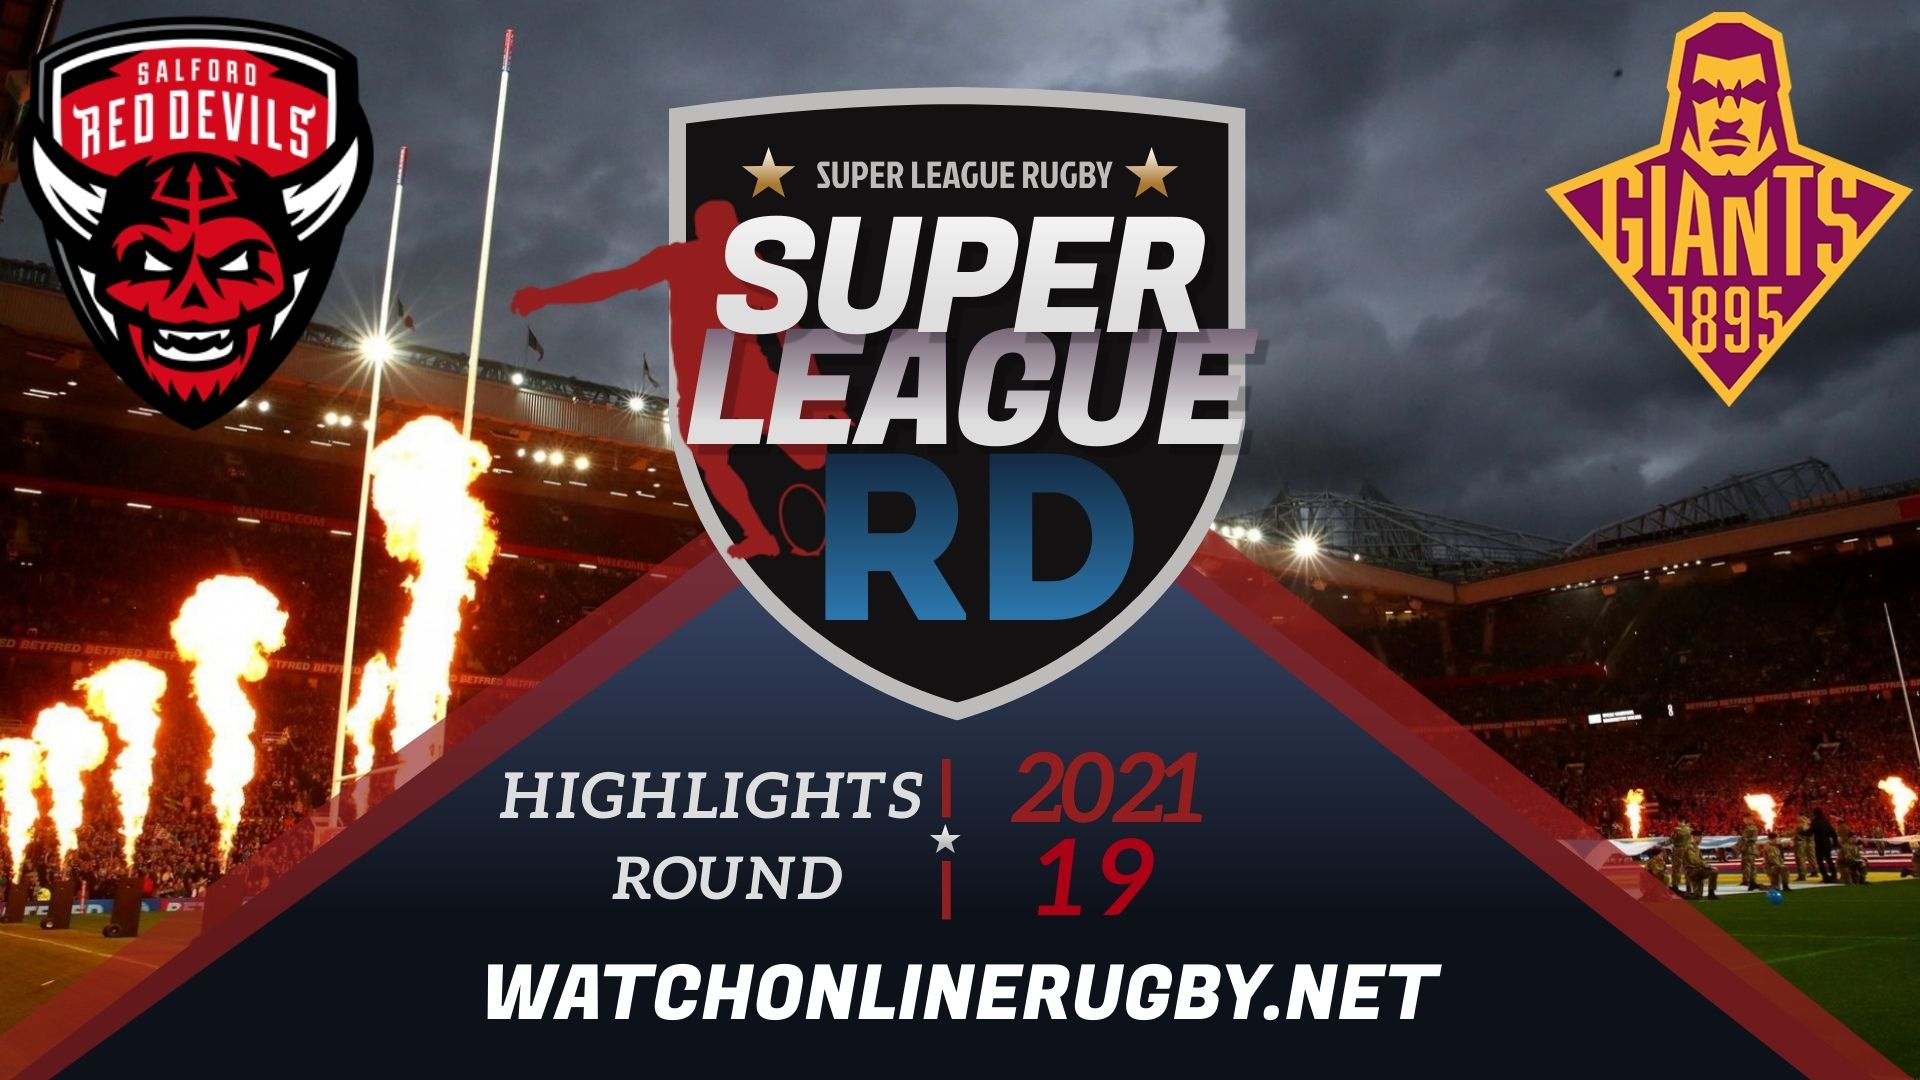 Salford Red Devils Vs Huddersfield Giants Super League Rugby 2021 RD 19